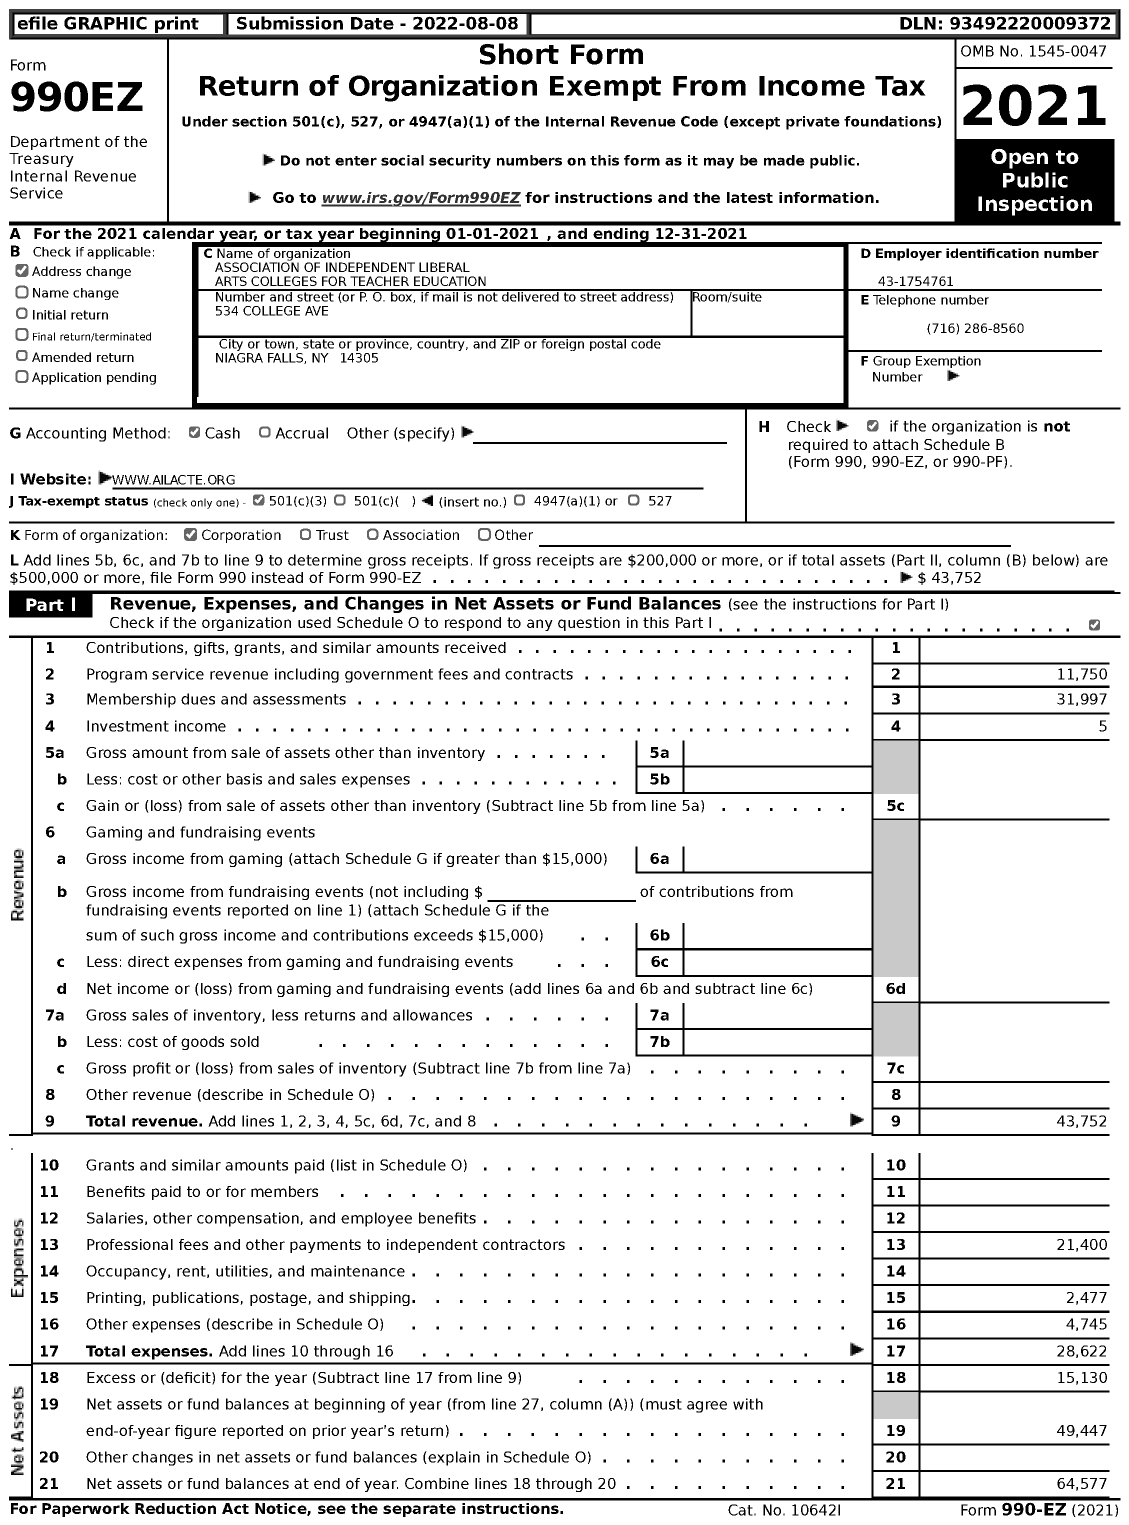 Image of first page of 2021 Form 990EZ for Association of Independent Liberal Arts Colleges for Teacher Education